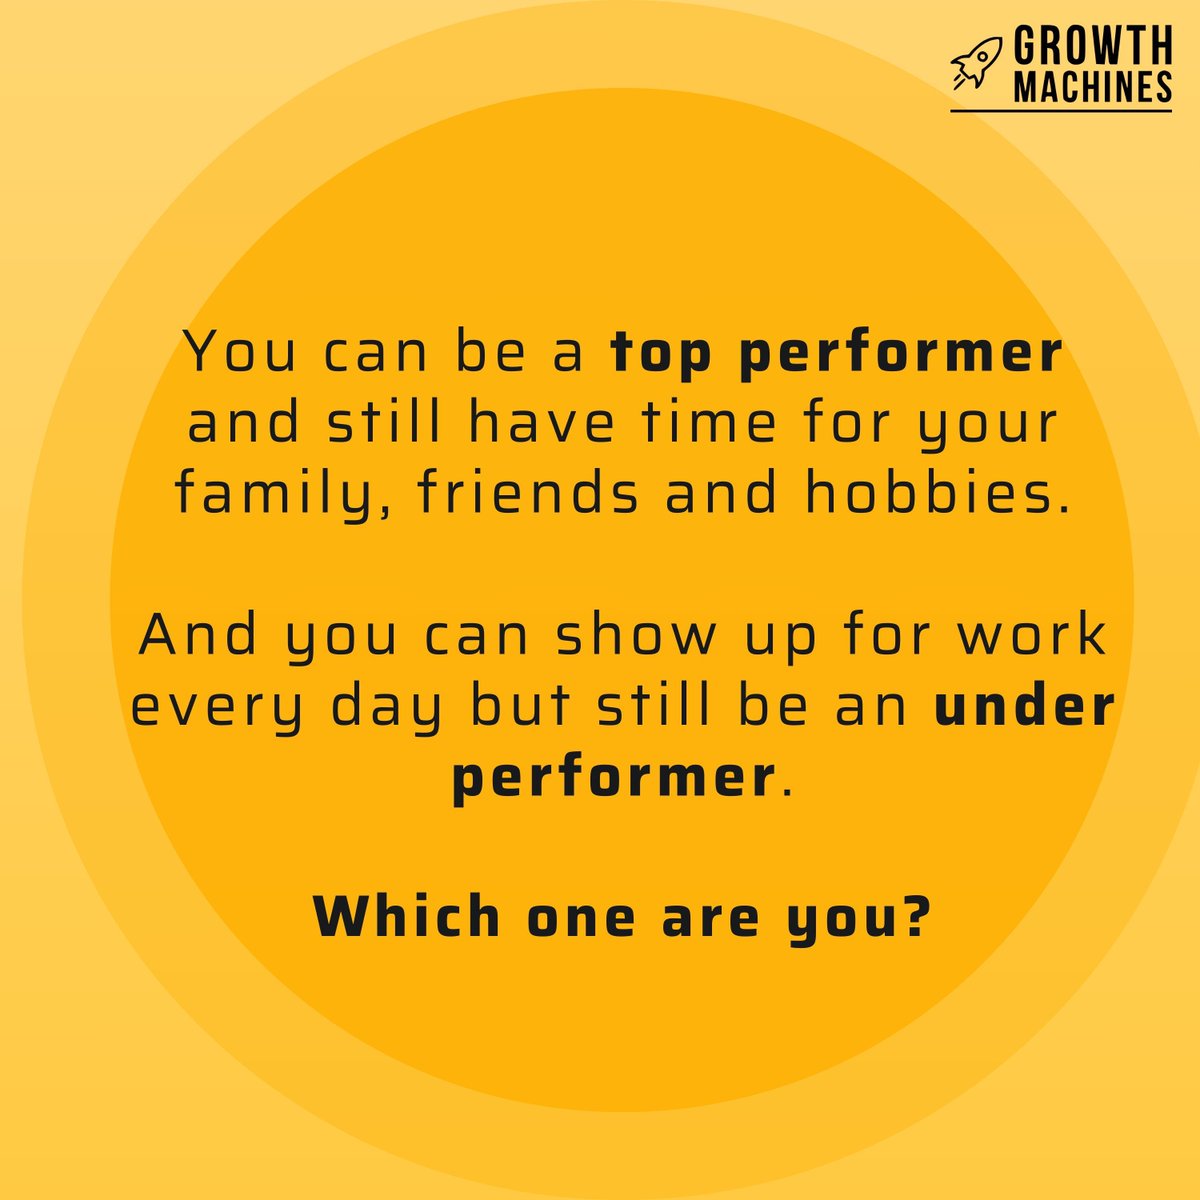 You can be a top performer and still have time for your family, friends and hobbies. And you can show up for work every day but still be an under performer. Which one are you? #topperformer #personalgrowth